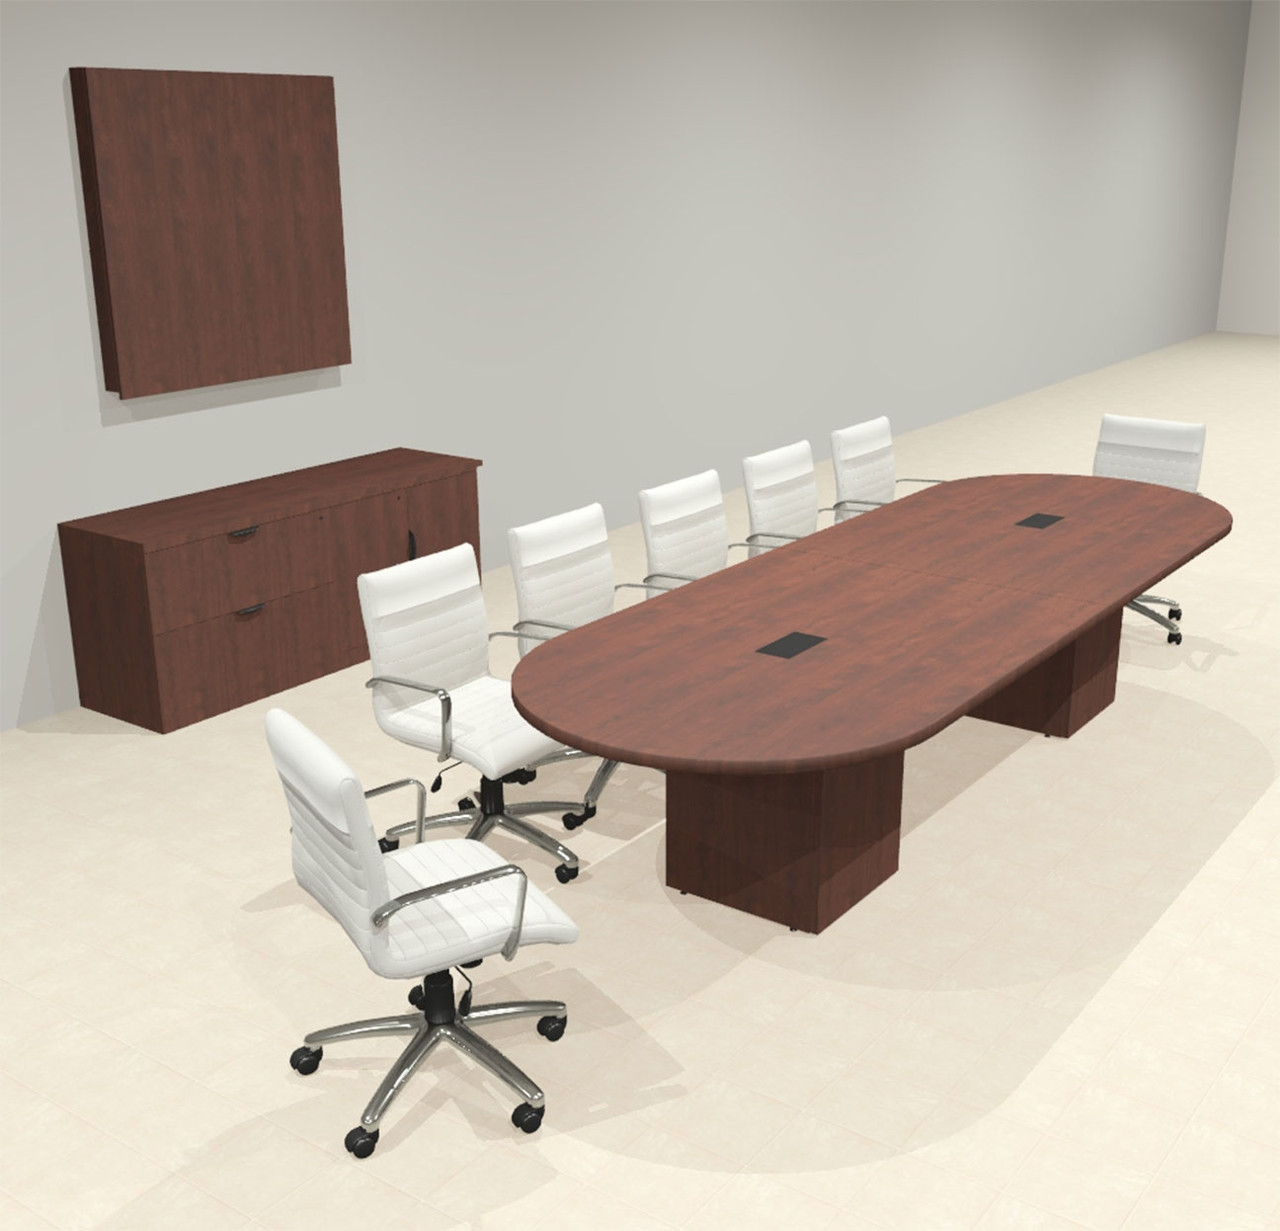 Modern Racetrack 12' Feet Conference Table, #OF-CON-CRQ13